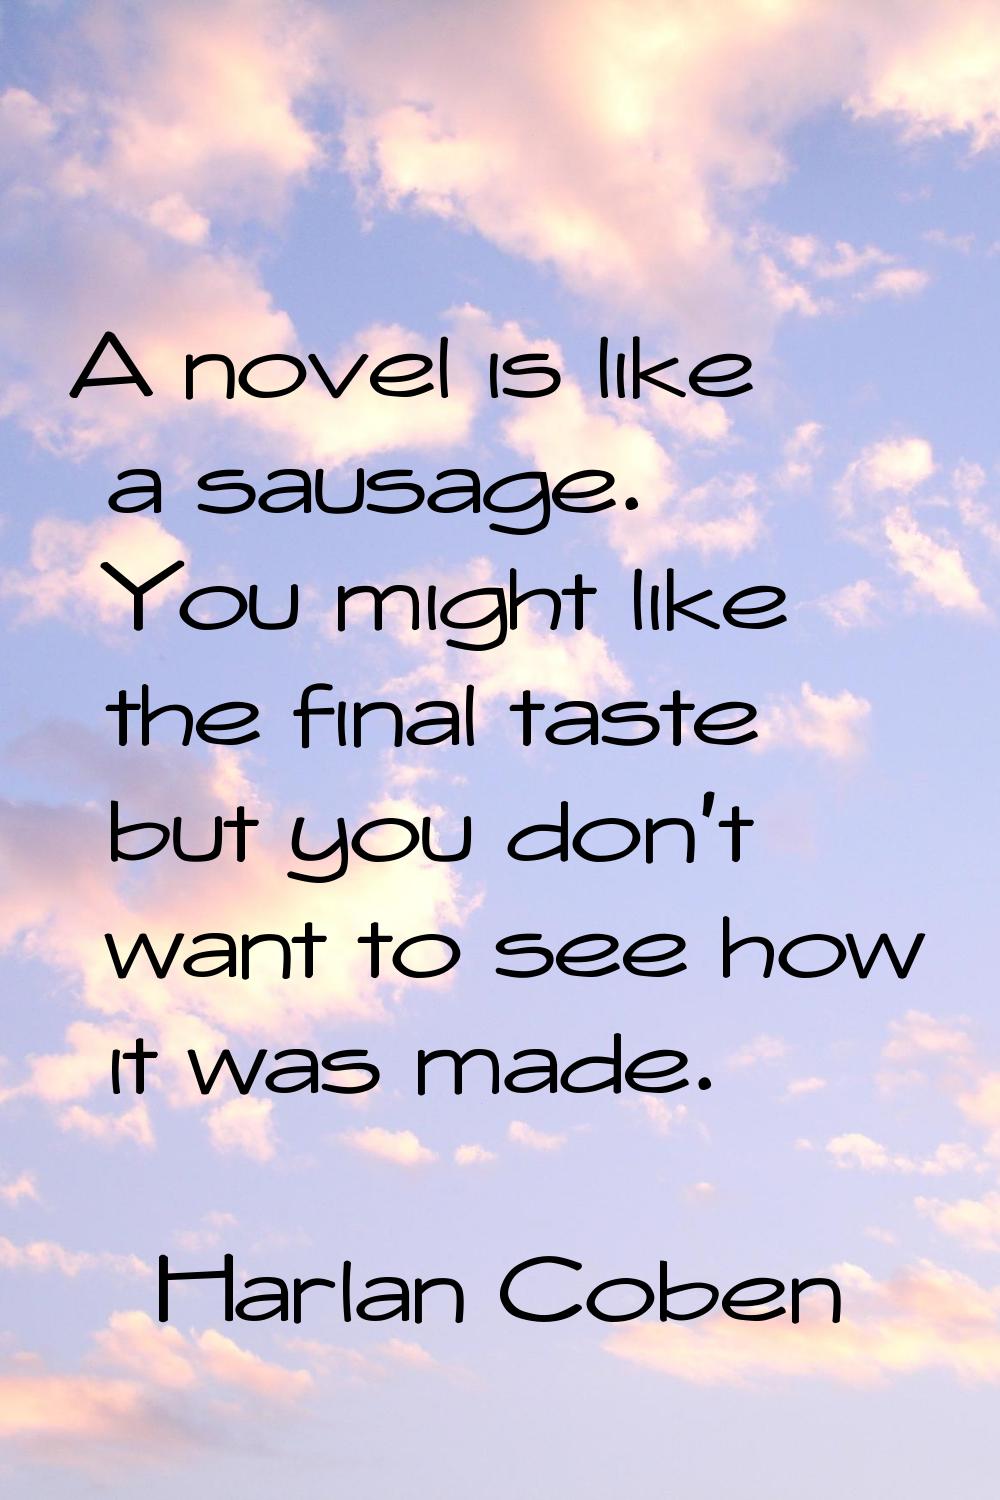 A novel is like a sausage. You might like the final taste but you don't want to see how it was made